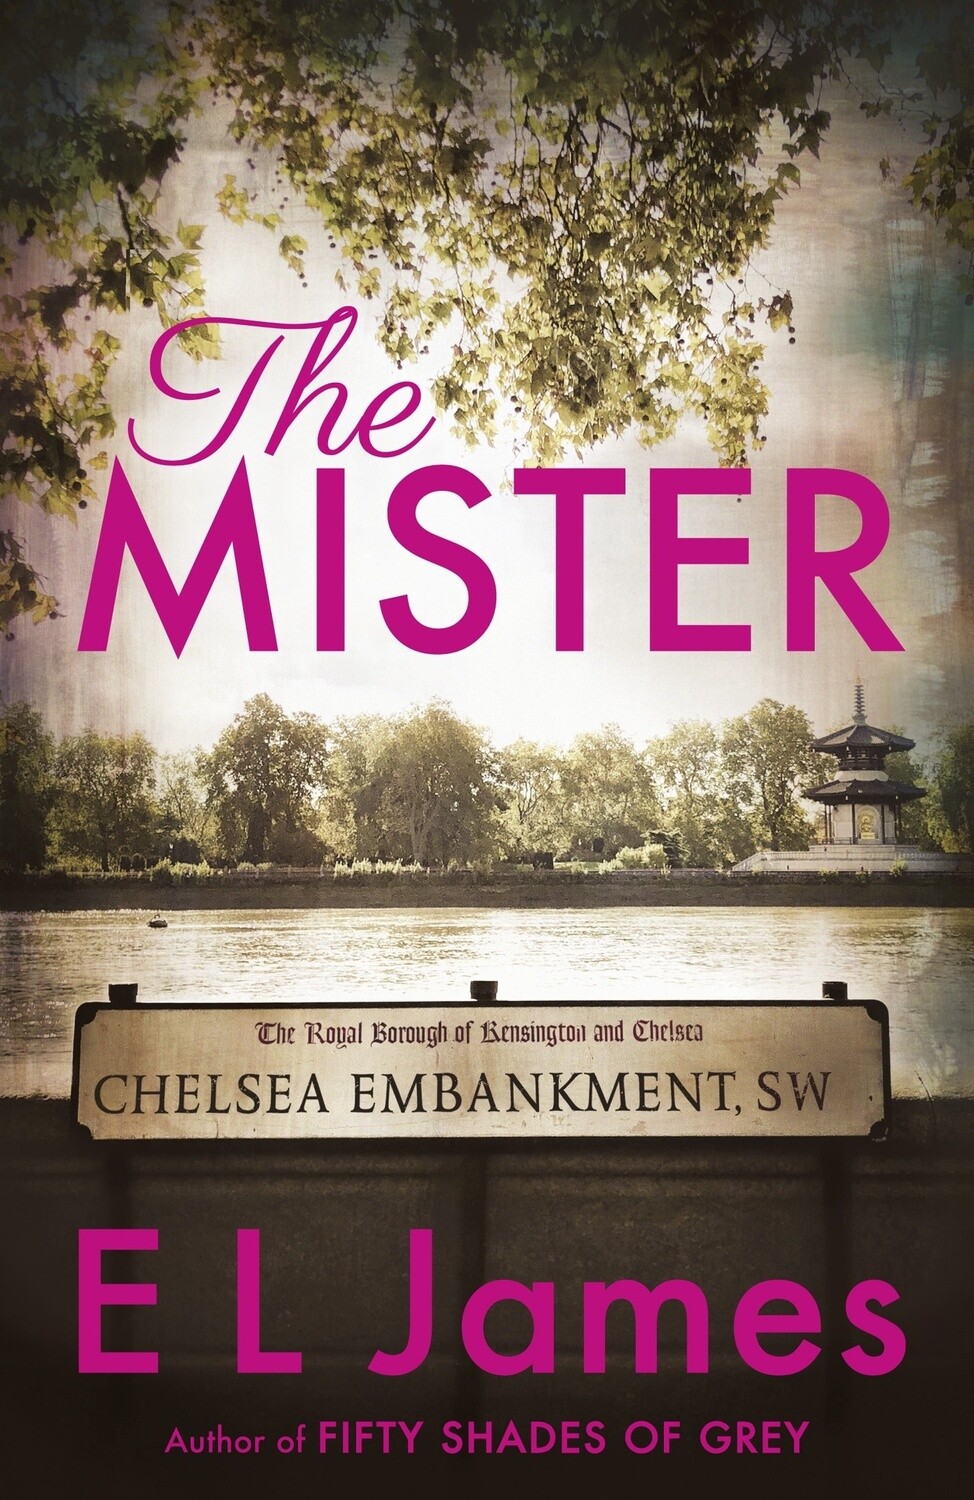 The Mister by E L James